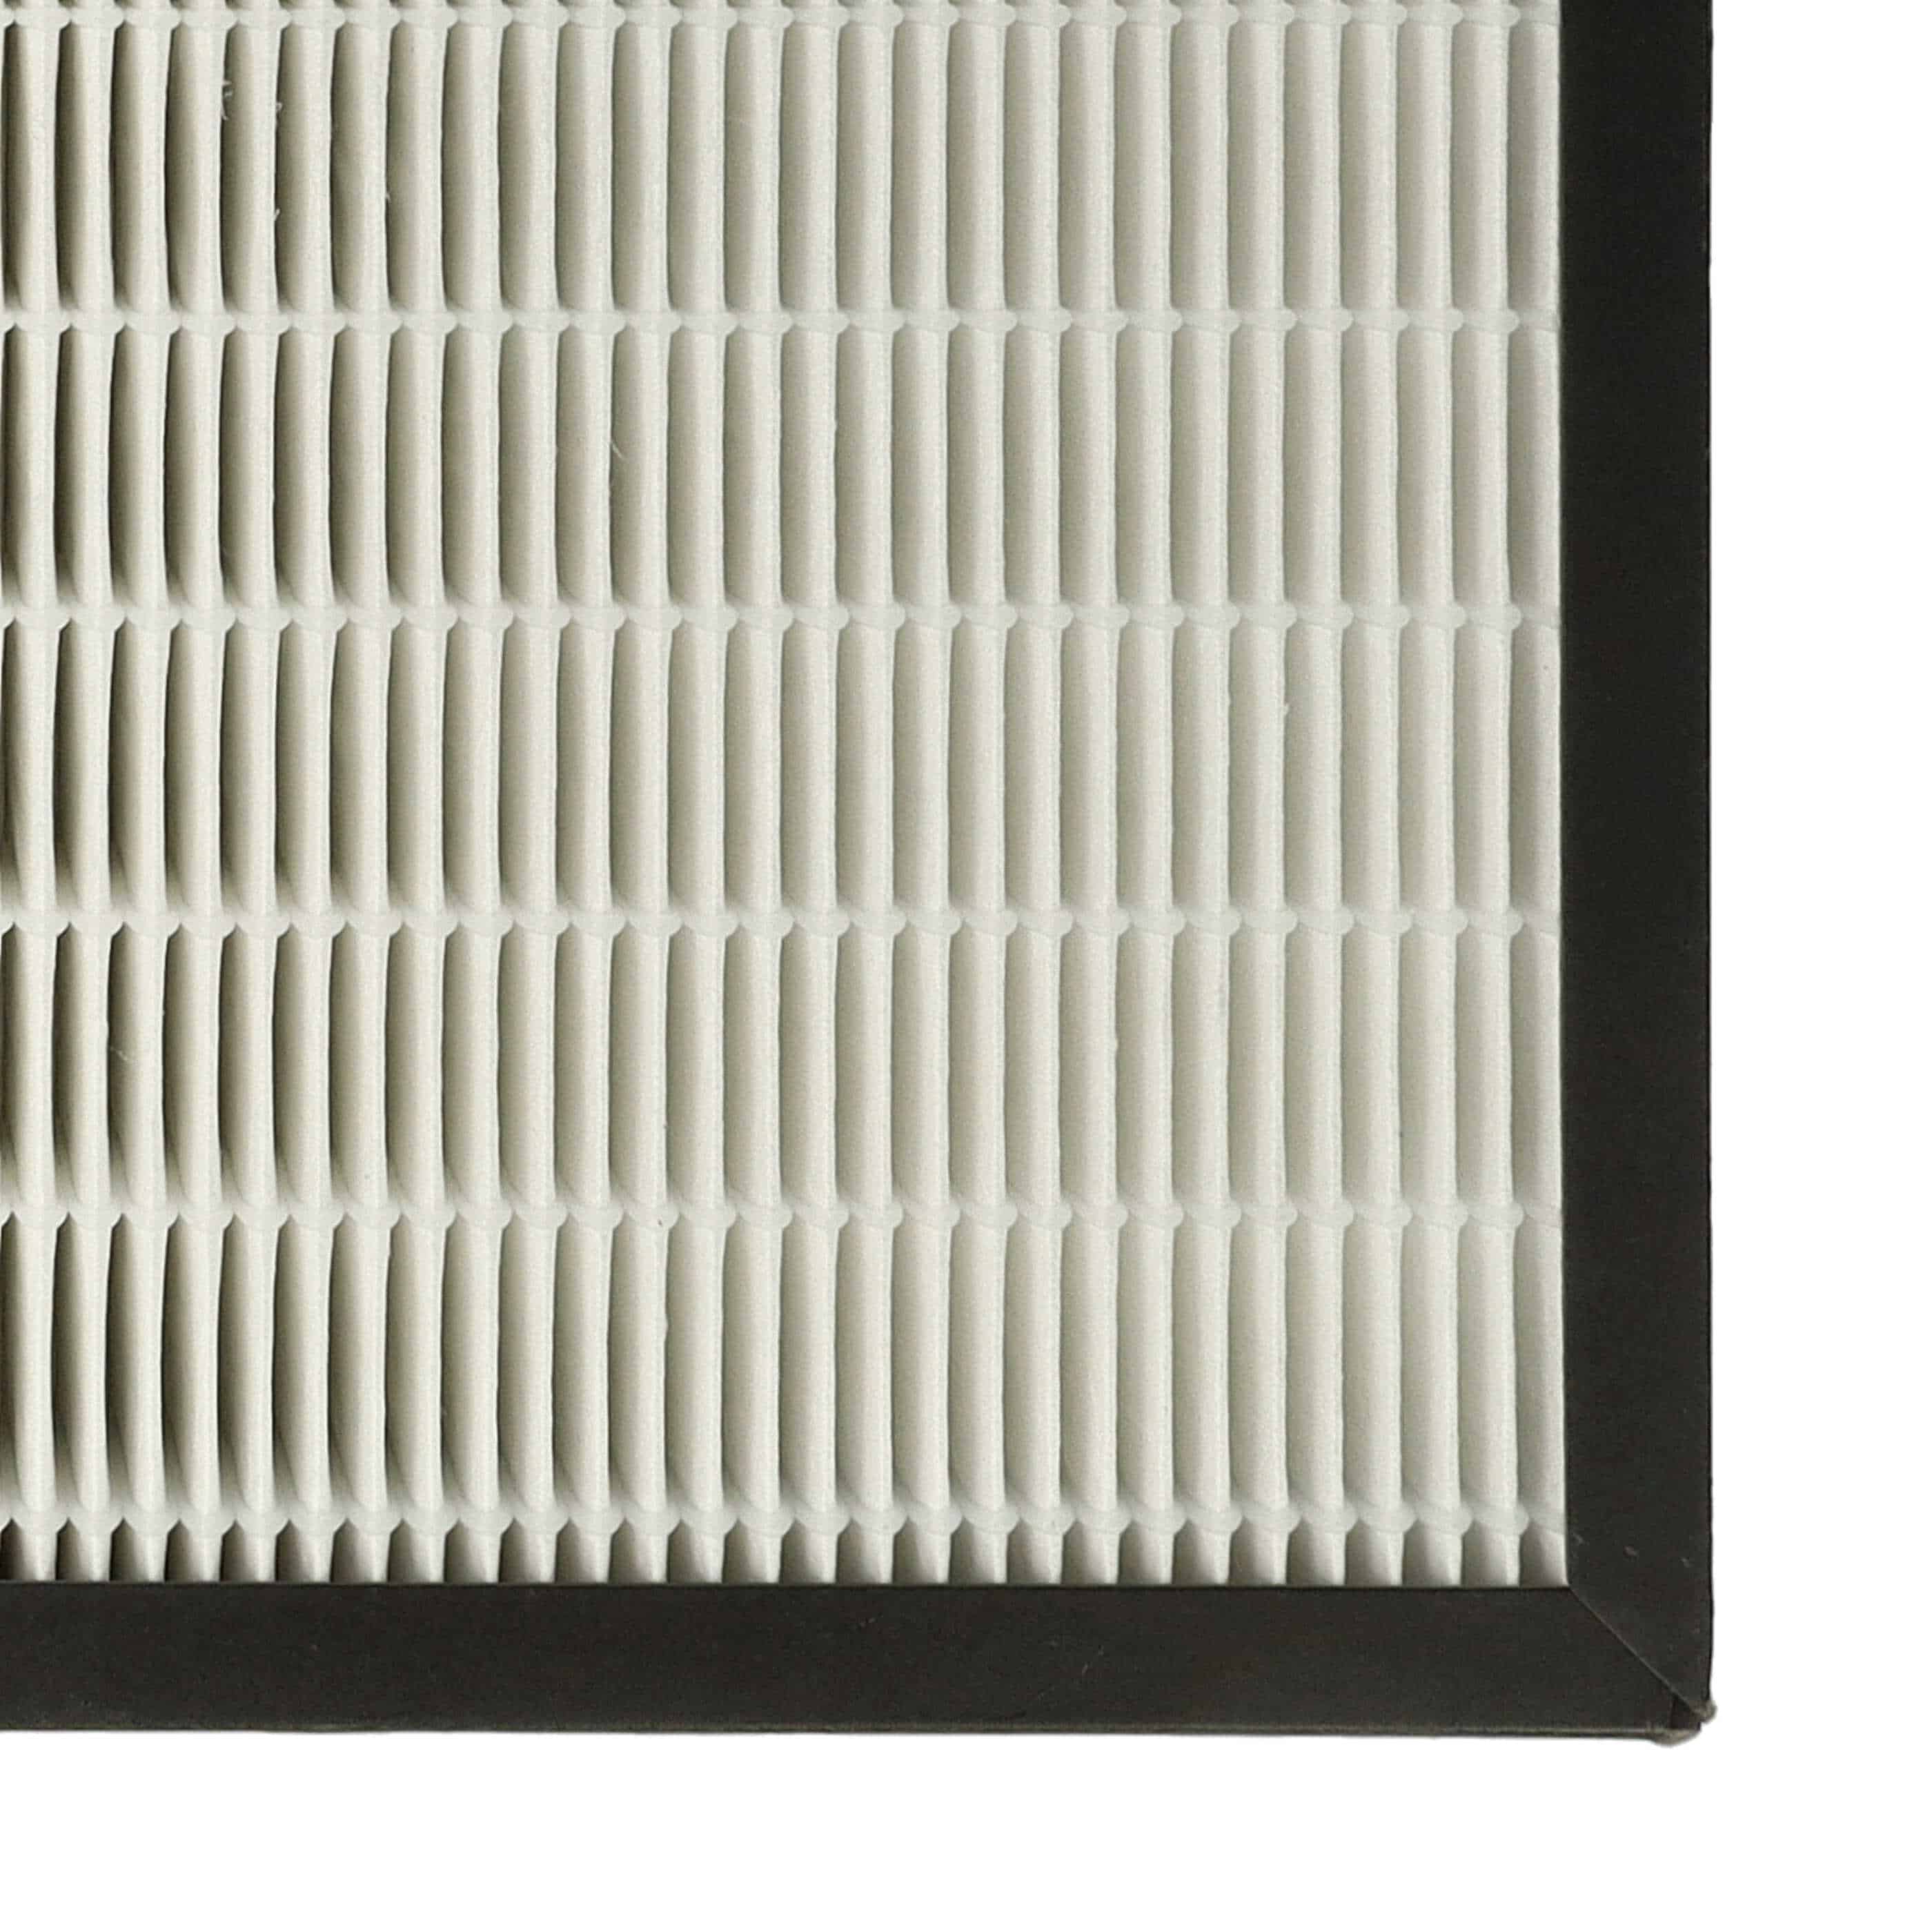 Filter as Replacement for Philips AC4158/00 - HEPA + Activated Carbon, 31.5 x 29 x 4 cm